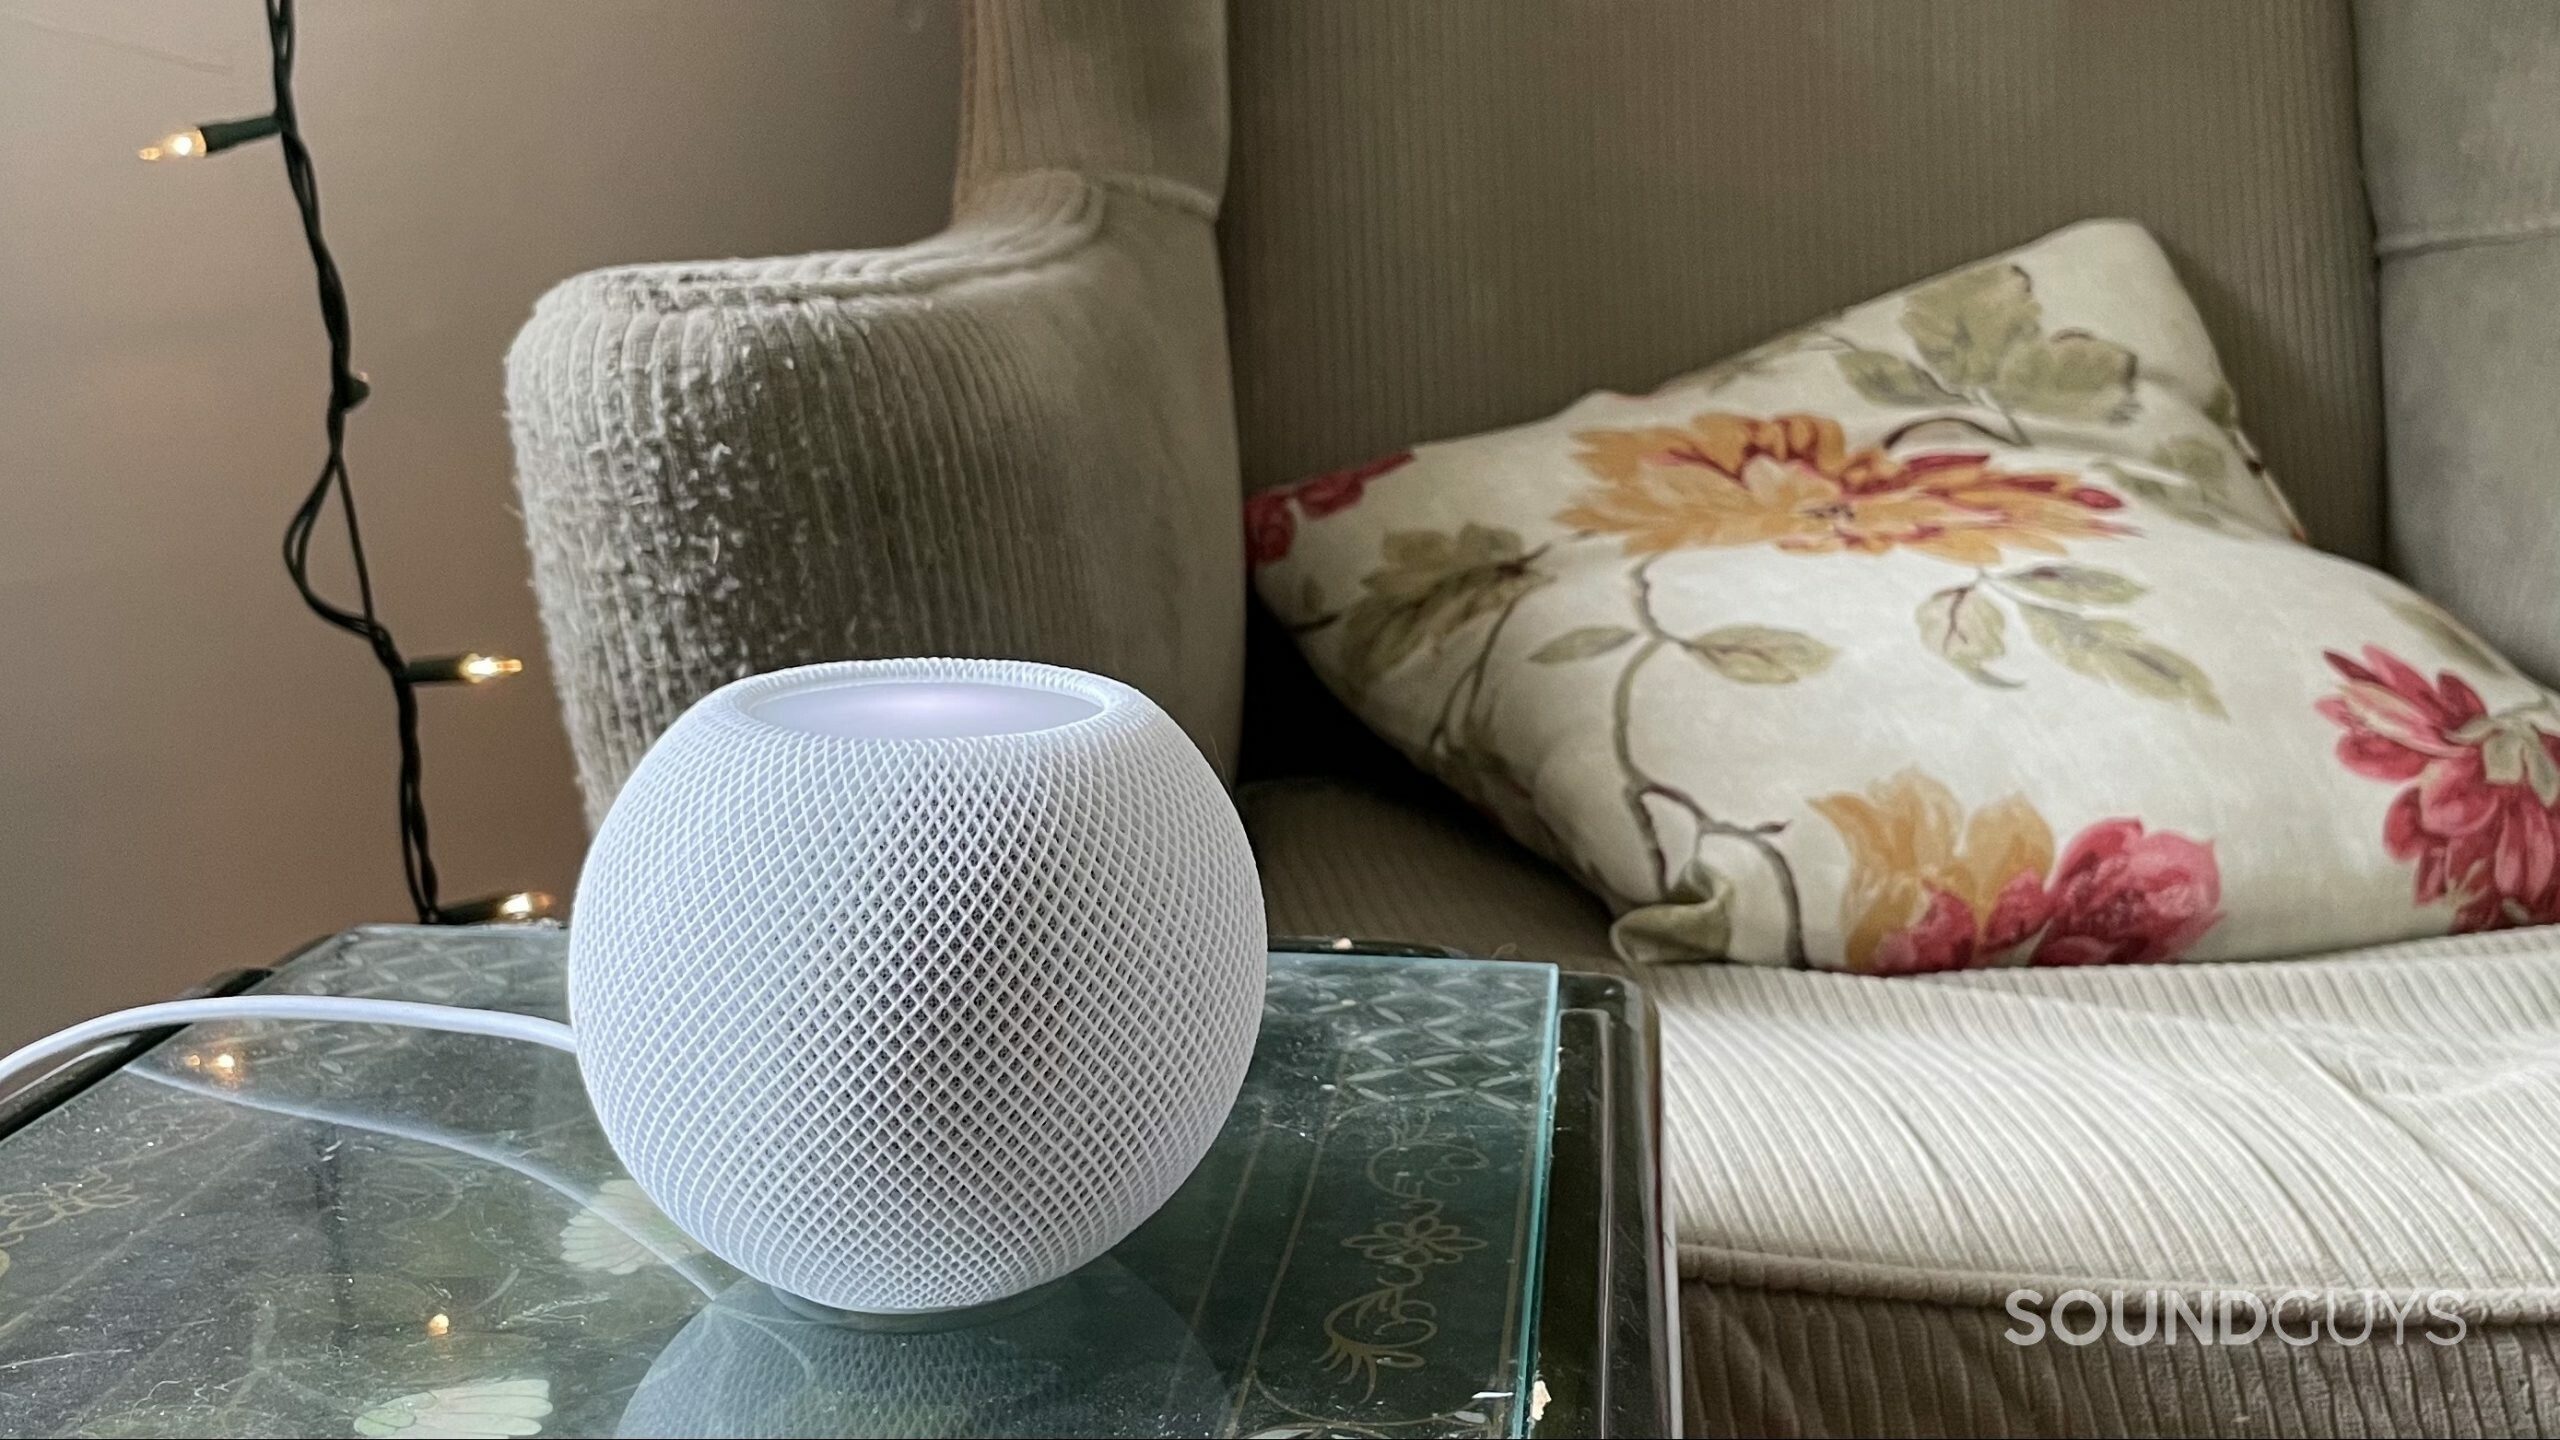 Apple introduces HomePod mini: A powerful smart speaker with amazing sound  - Apple